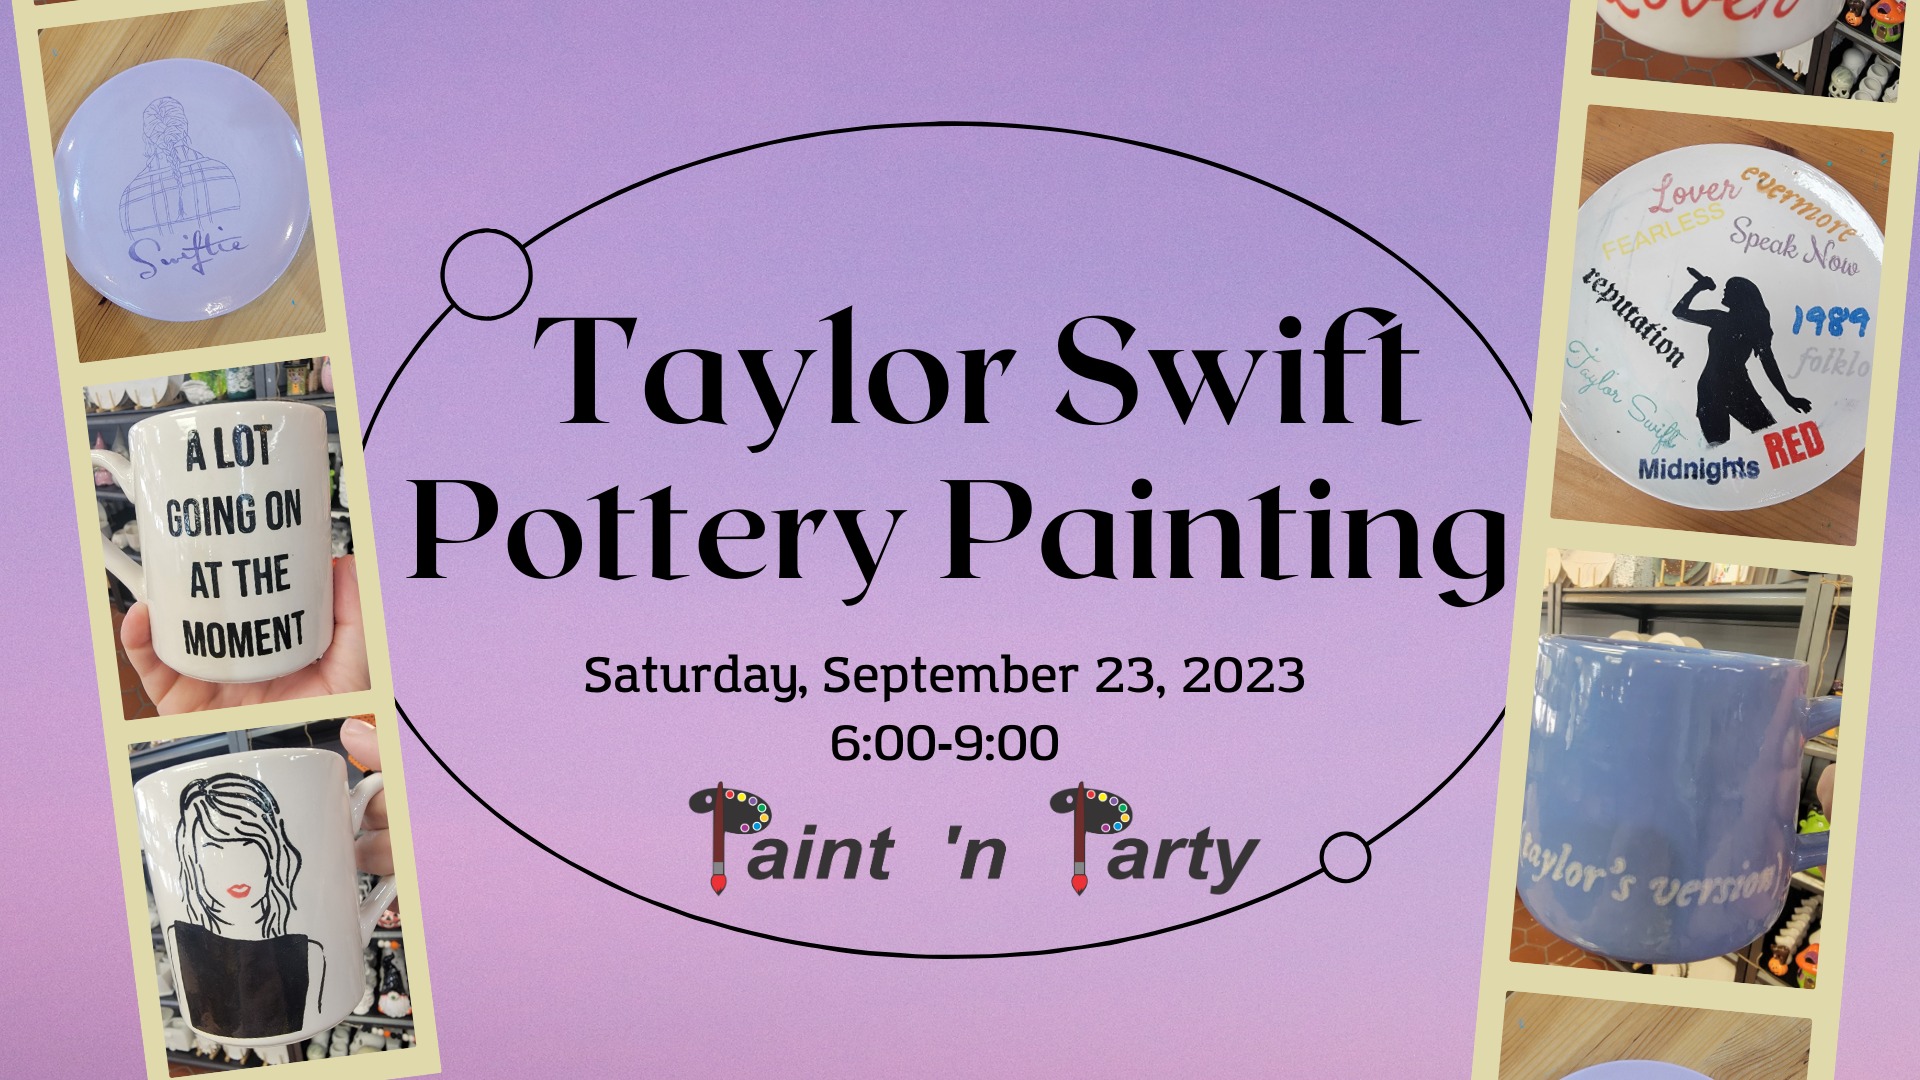 Taylor Swift Pottery Painting